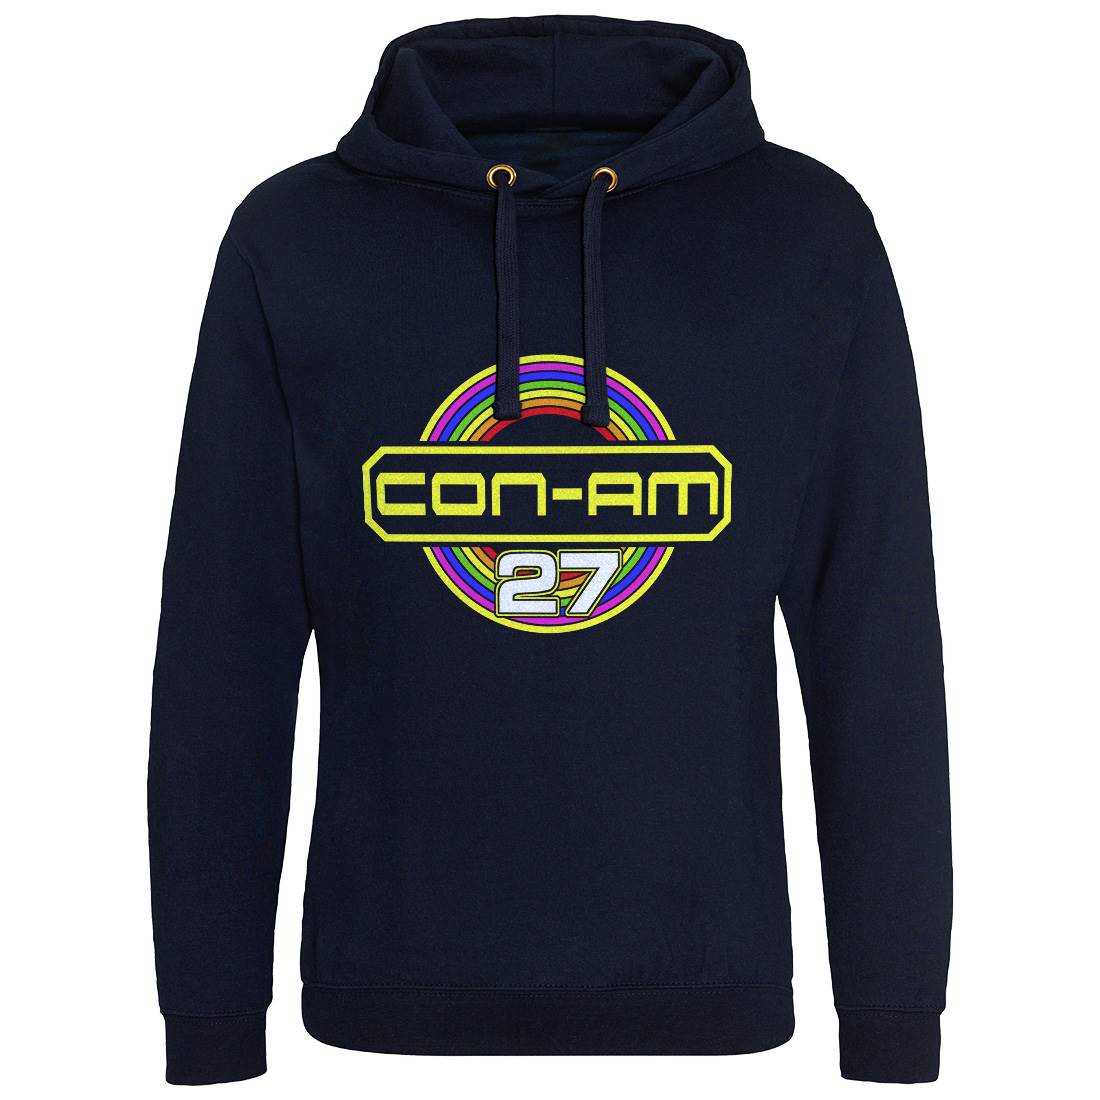 Con-Am 27 Mens Hoodie Without Pocket Space D414